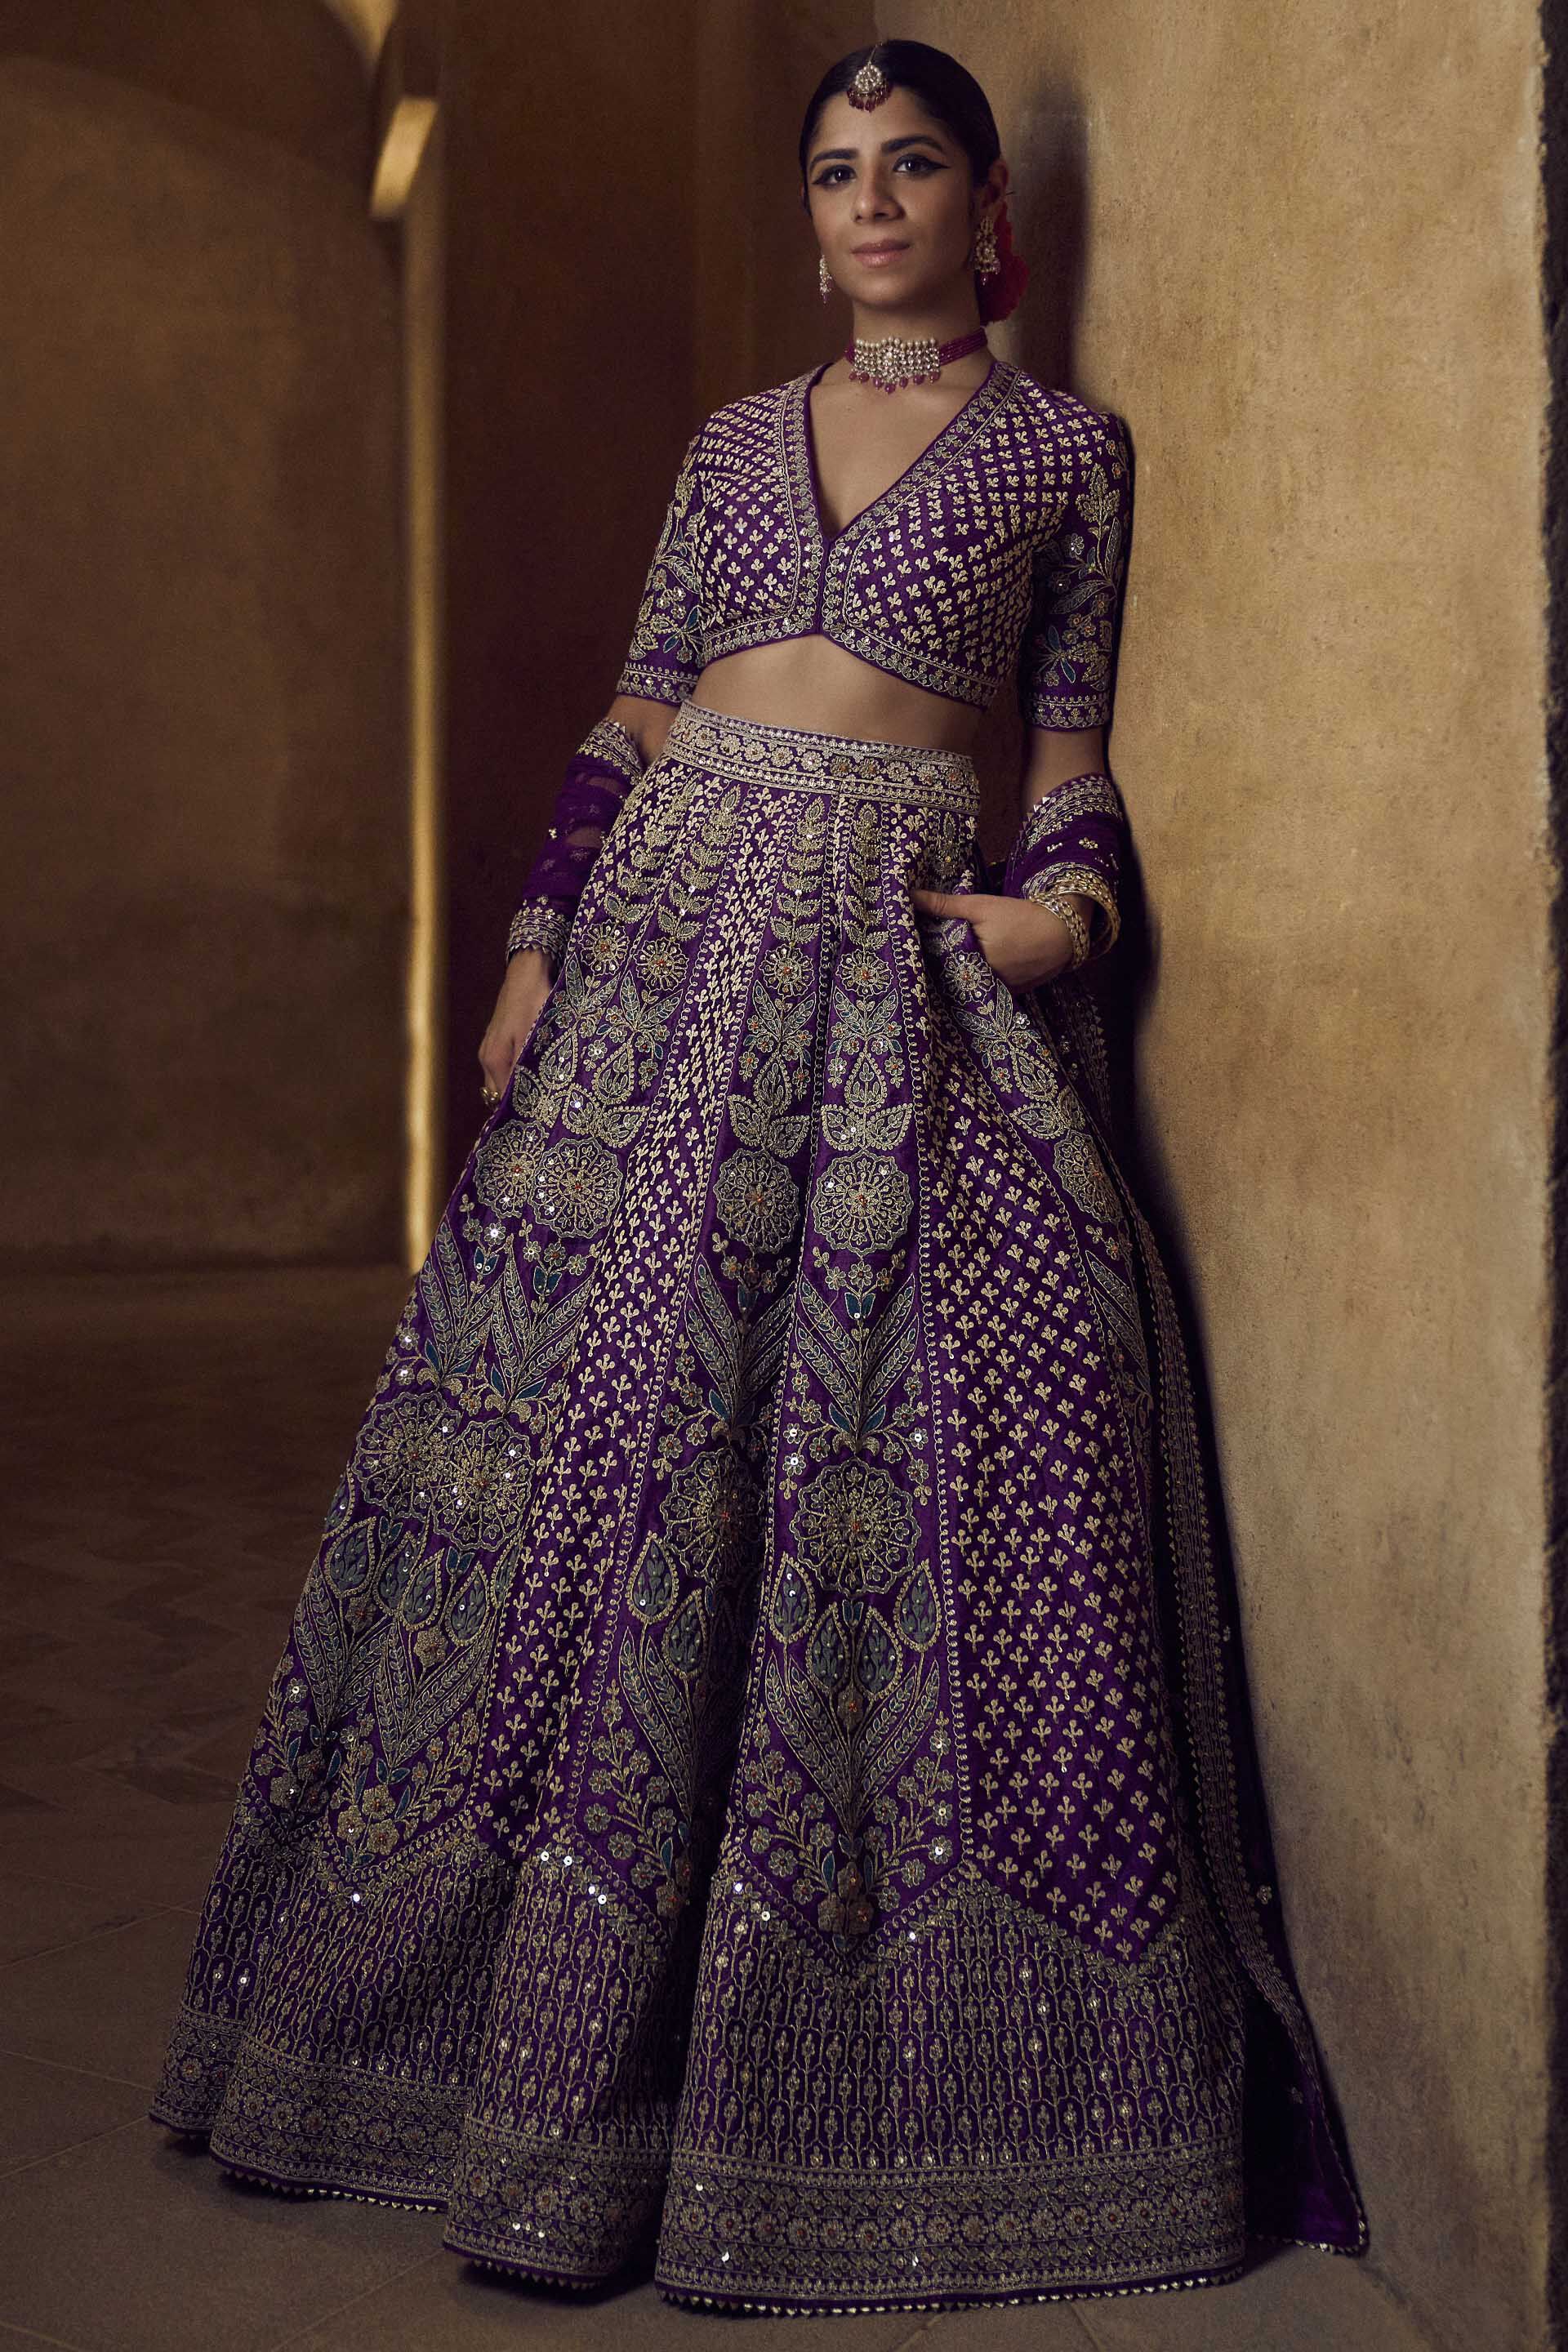 25 Anita Dongre Lehengas for Every Occasion